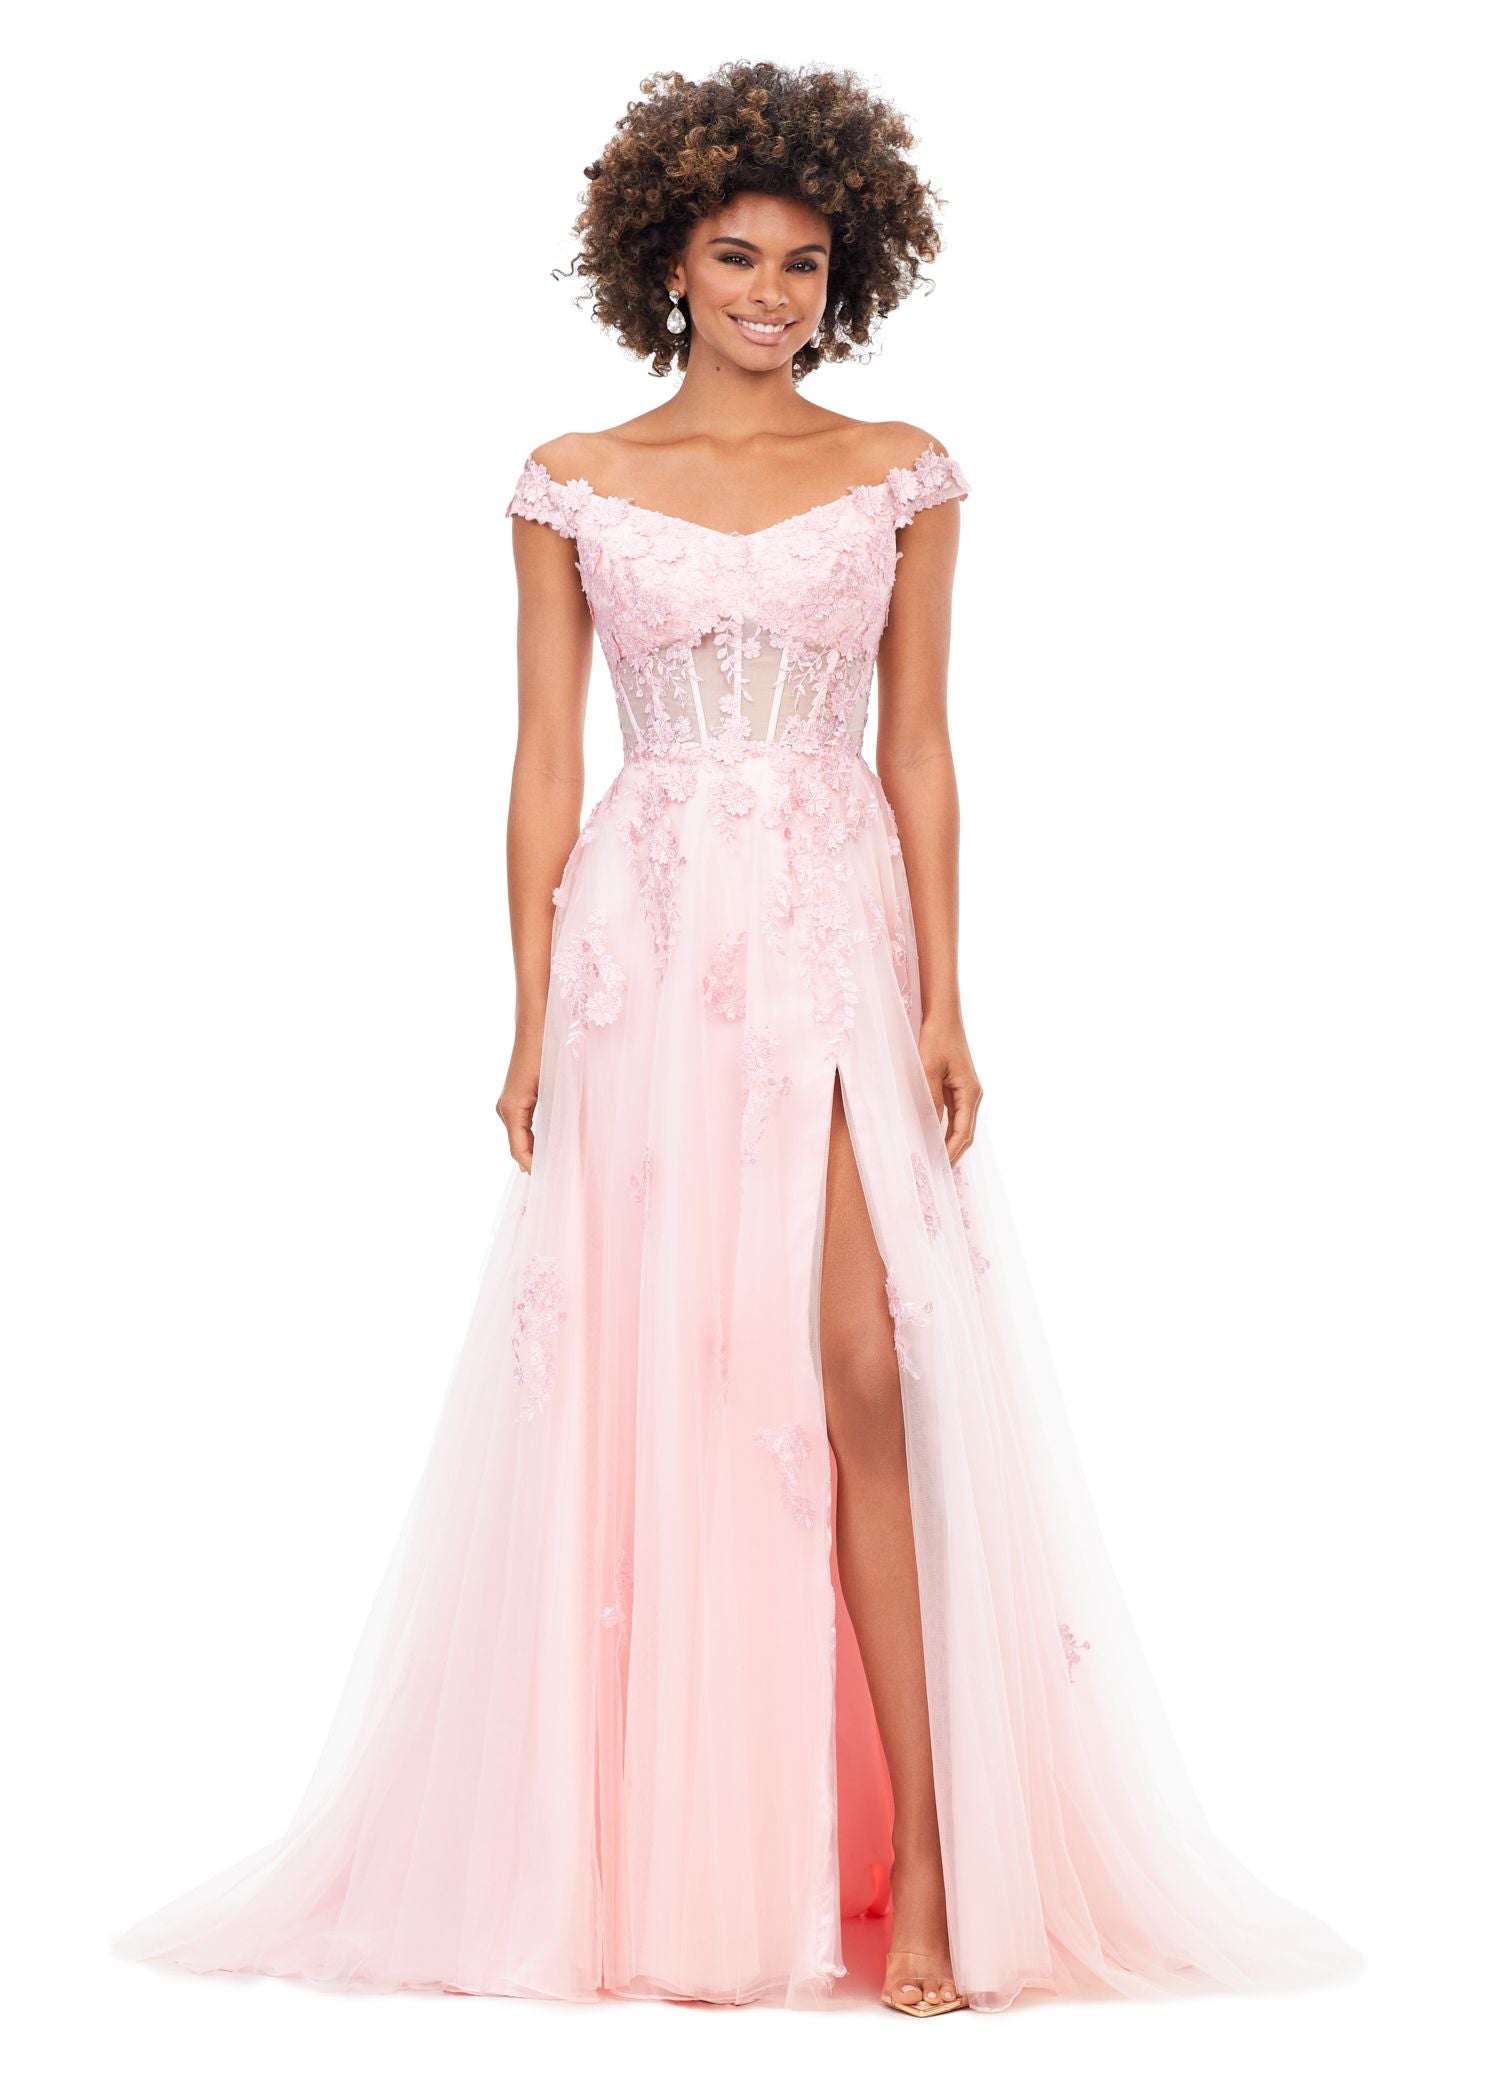 Ashley Lauren 11376 This off the shoulder fairytail dream gown features an illusion corset and 3-dimensional lace flower appliques throughout layers of tulle. The look is complete with a left leg slit. Off Shoulder Neckline Illusion Bodice 3-Dimensional Lace Flower Appliques Tulle Black, Pink